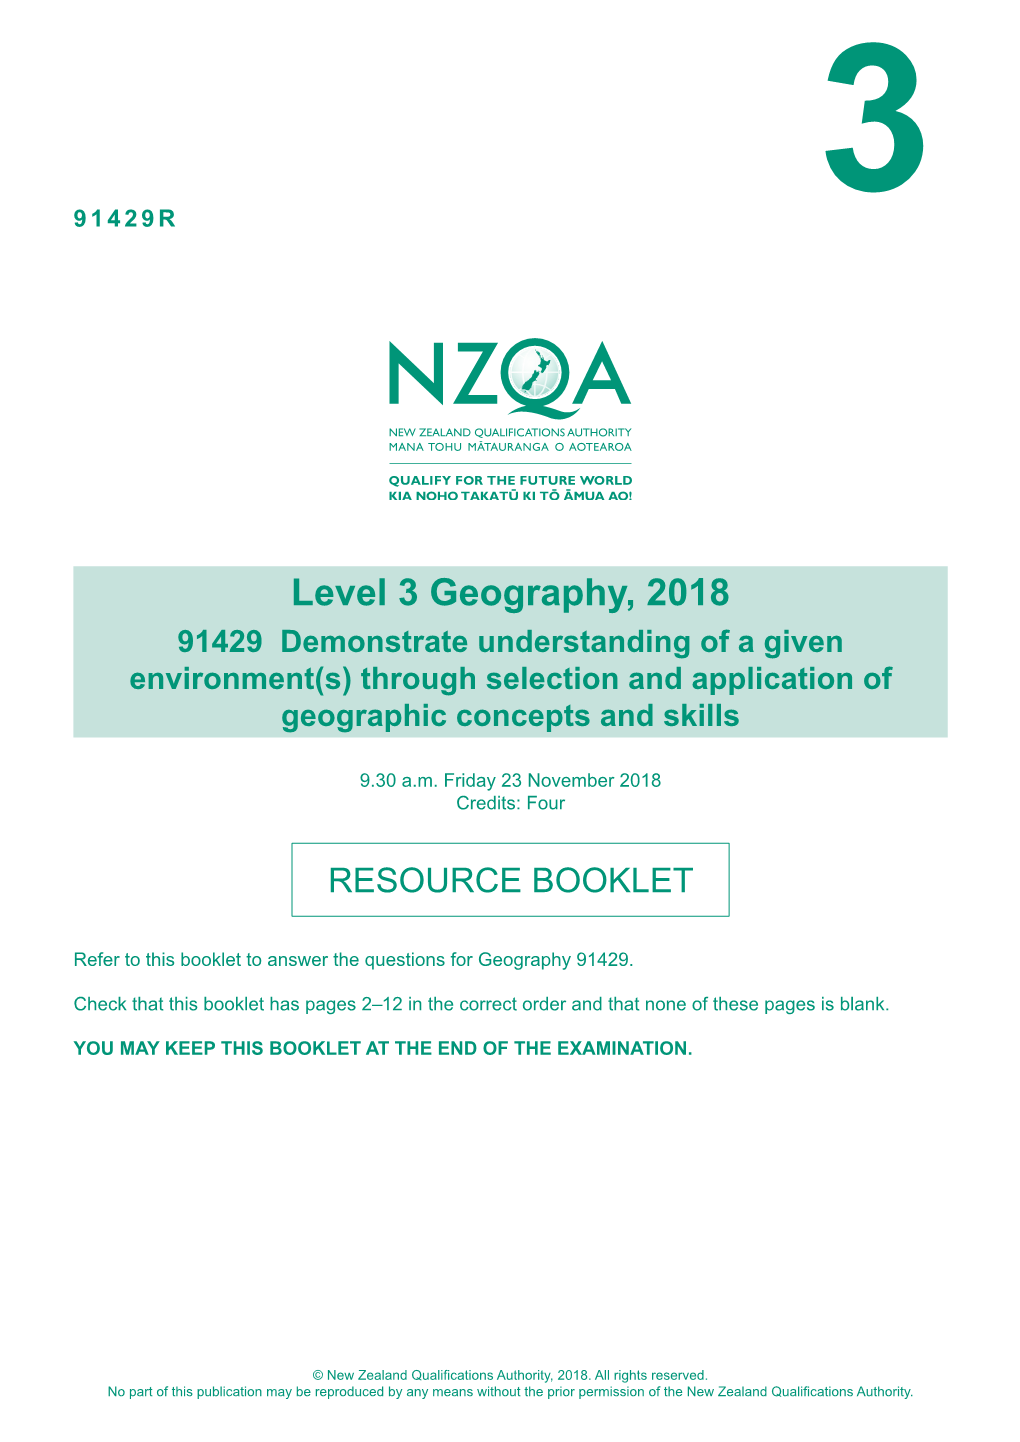 Level 3 Geography (91429) 2018